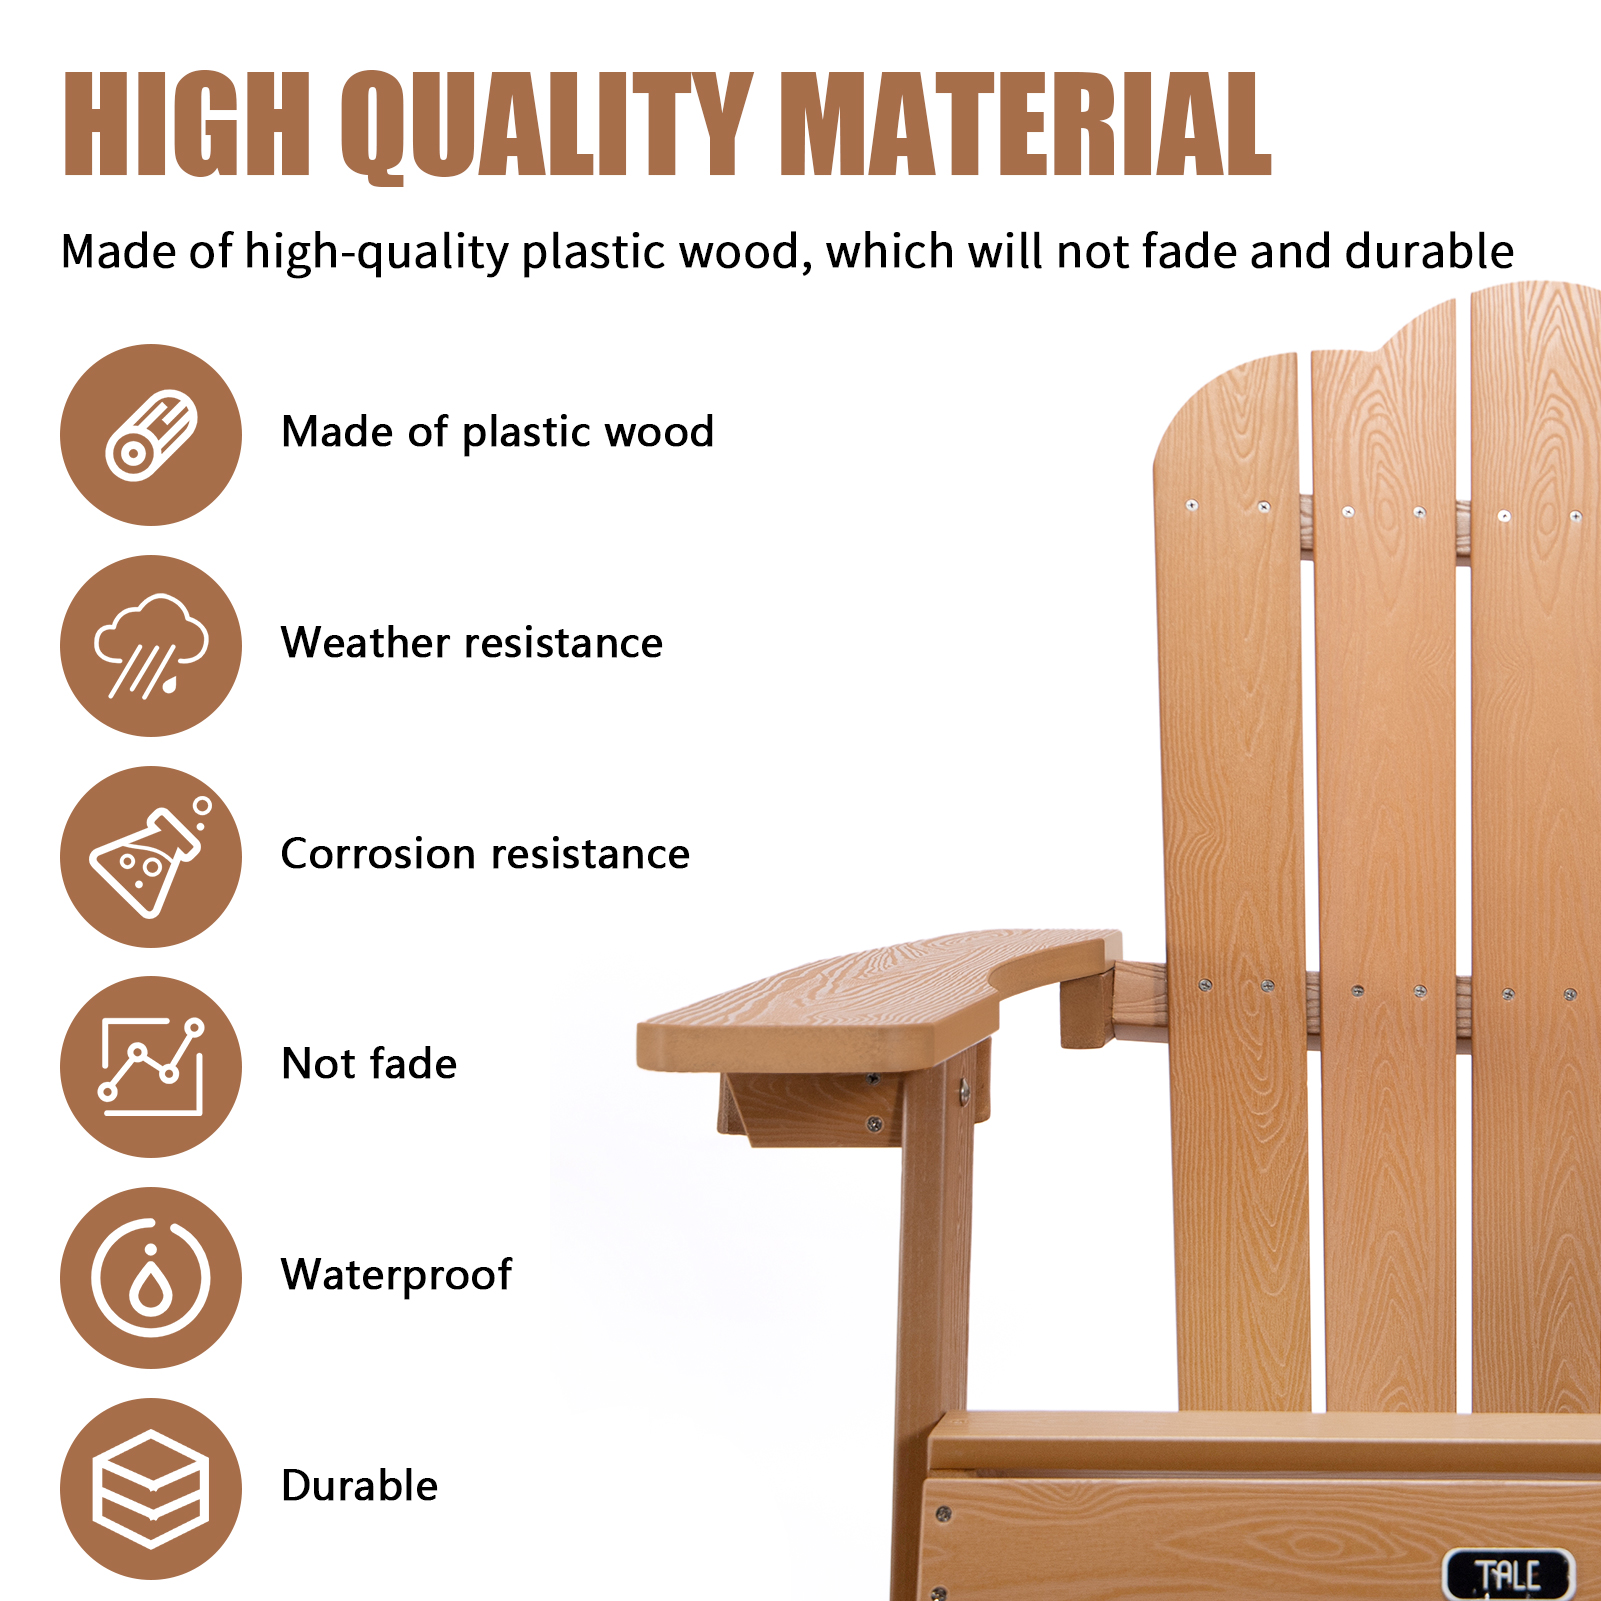 KOFUN Adirondack Chair with Cup Holder, Patio Outdoor Chairs, Weather Resistant Lounge Chair, Fade-Resistant, Backyard Furniture Painted Chair, for Lawn Outdoor Patio Deck Garden Porch Lawn - image 2 of 7